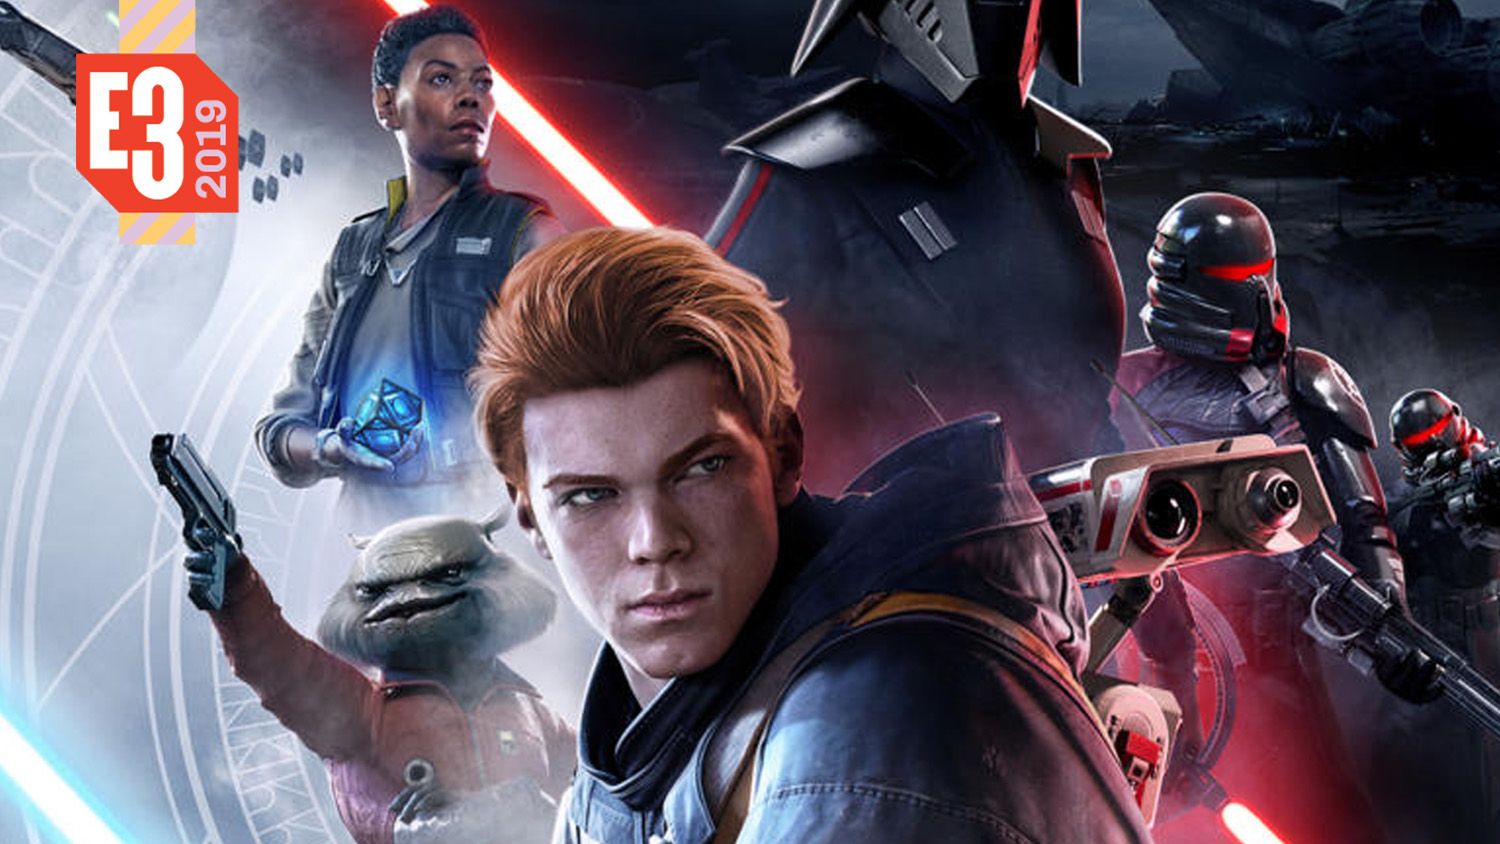 A Huge New 'Star Wars' Game Is About to Be Revealed: Here's What